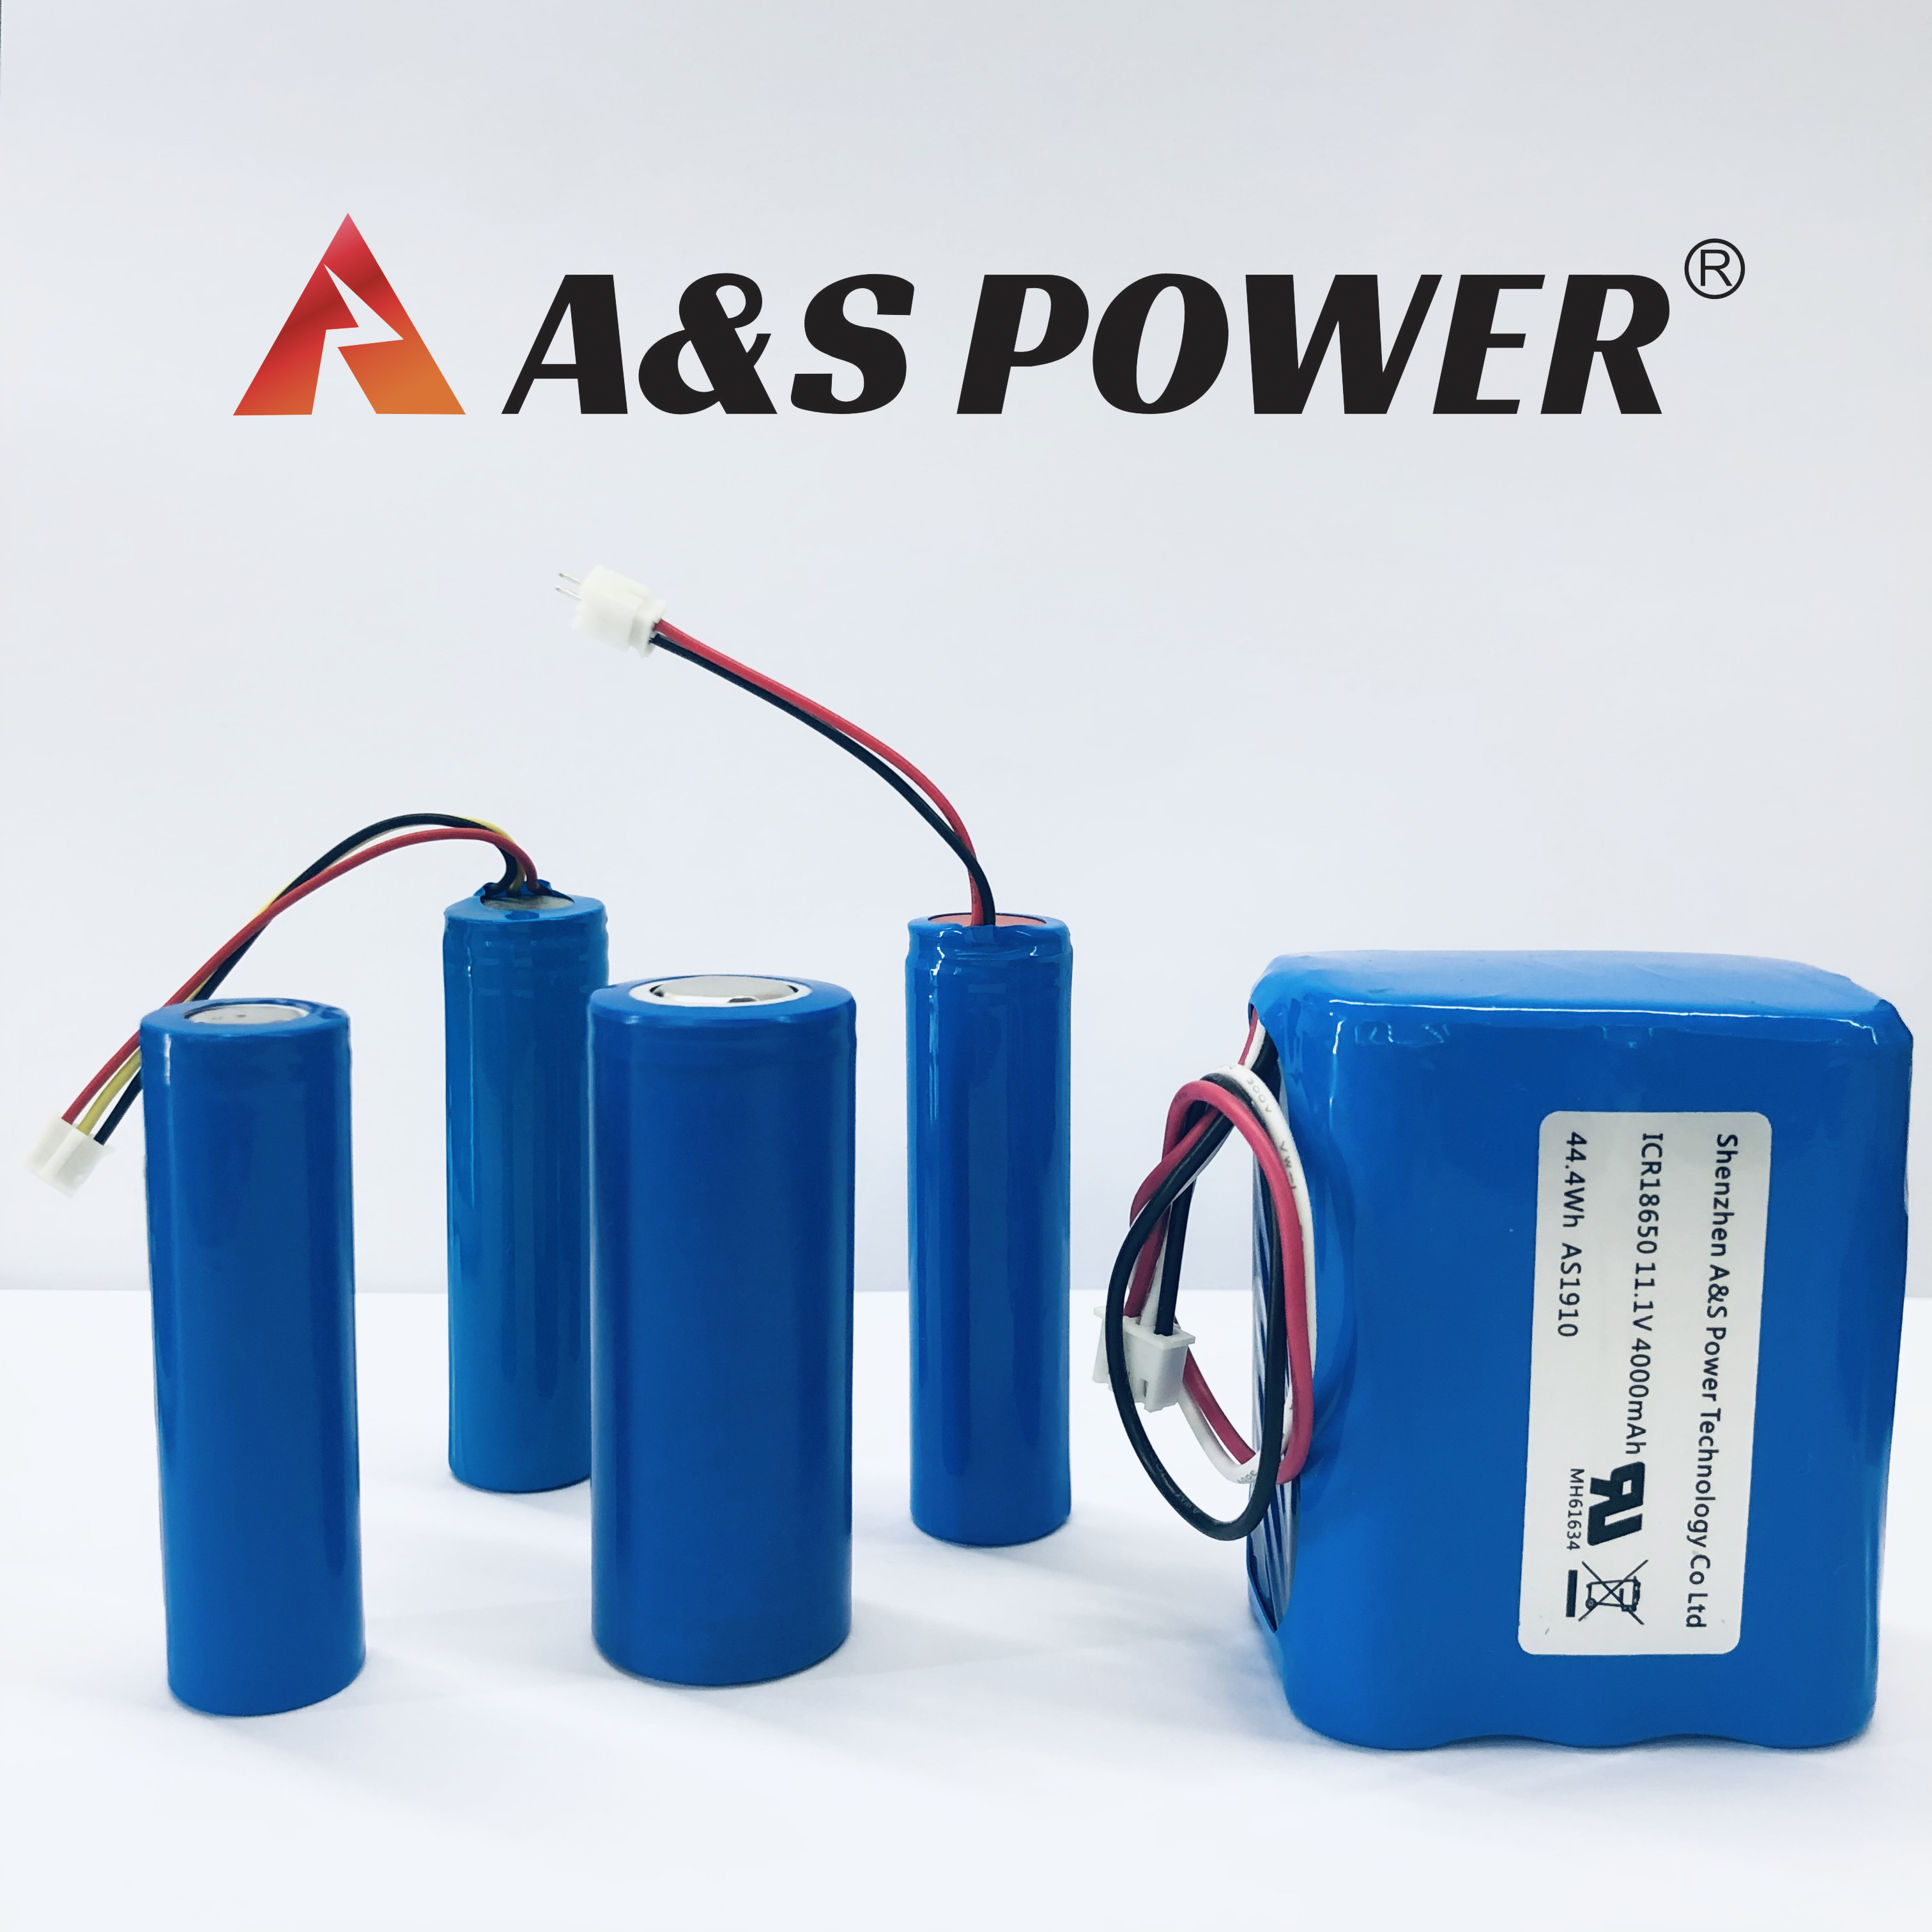 A&S Power Lithium-ion battery